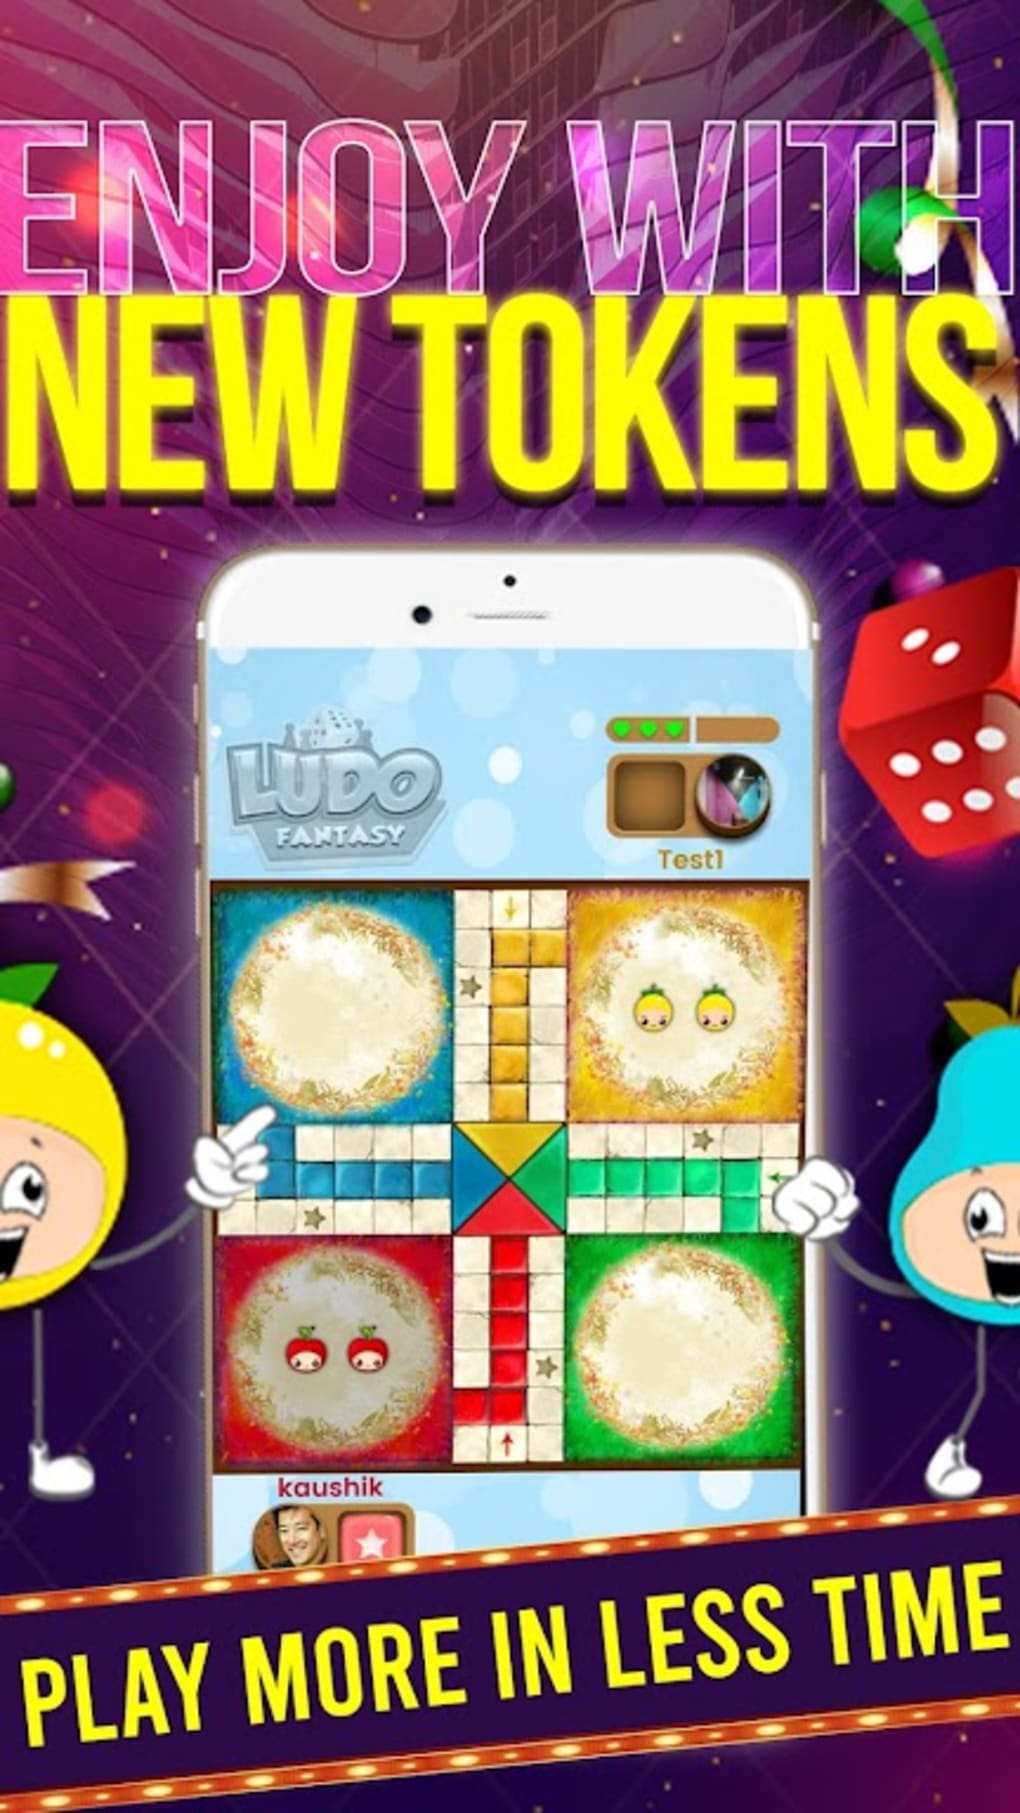 Super Ludo Multiplayer Fantasy - Apps on Google Play